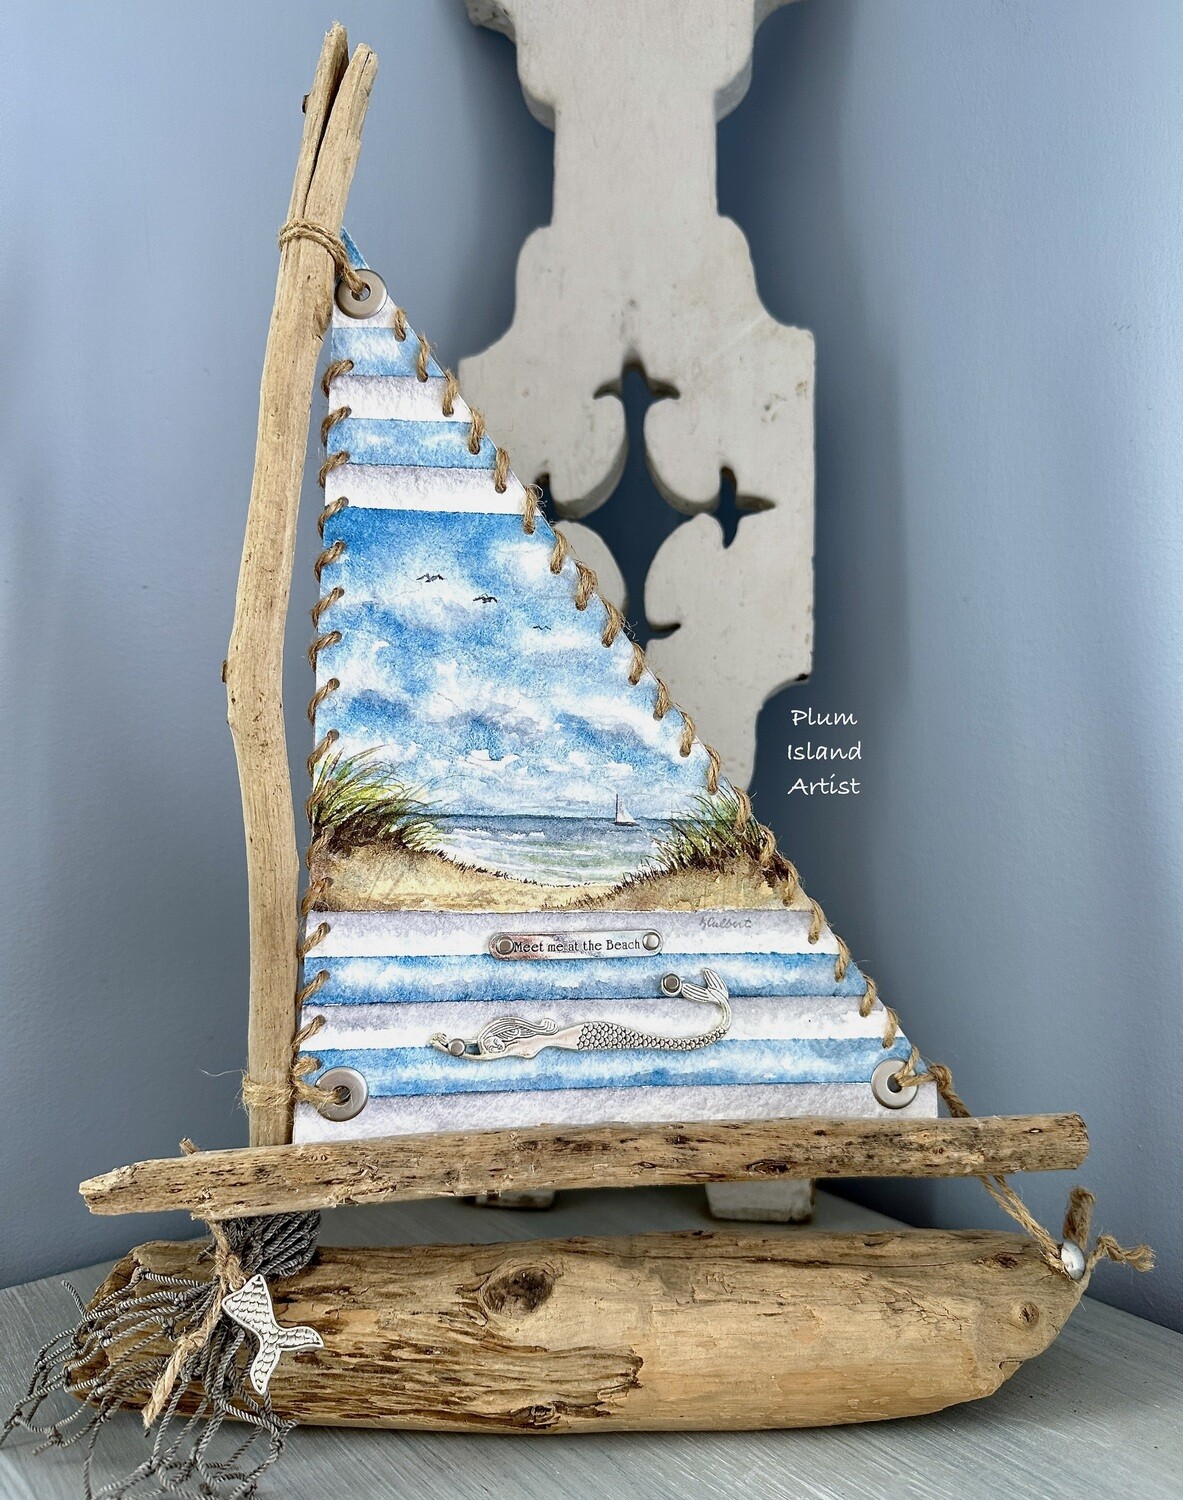 Hand-crafted Driftwood Sailboat with a hand-painted Sail